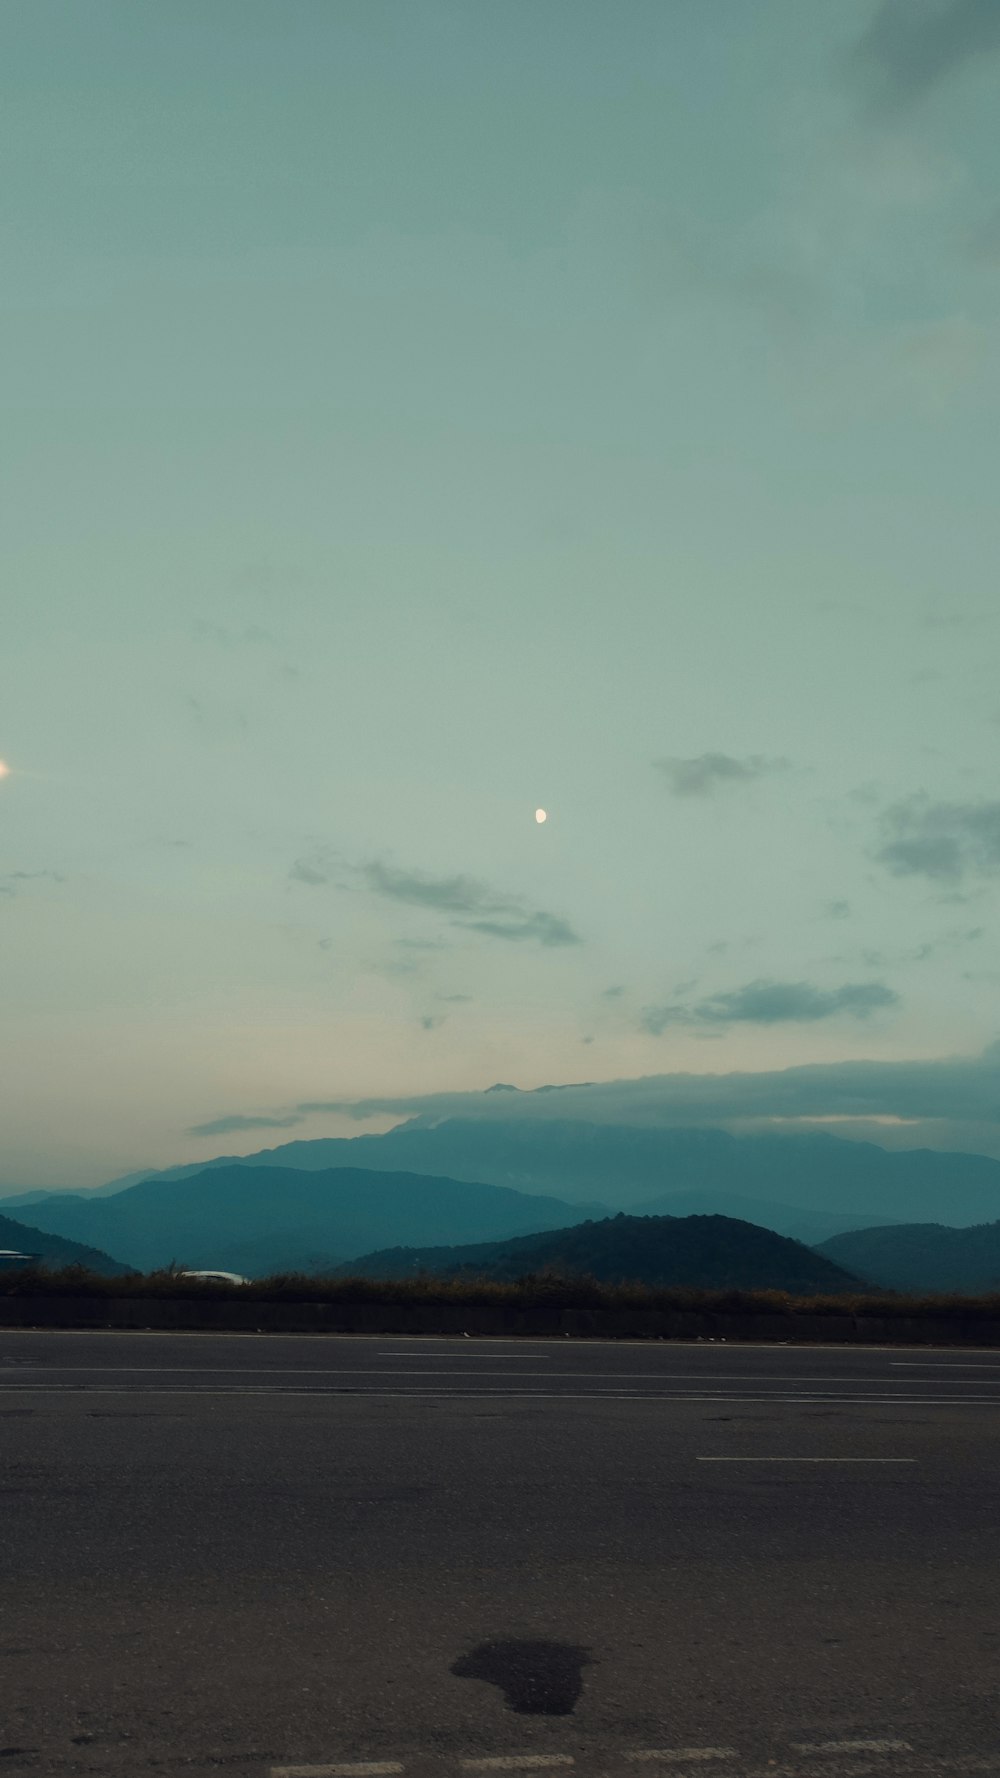 a view of a mountain range at dusk with the moon in the sky